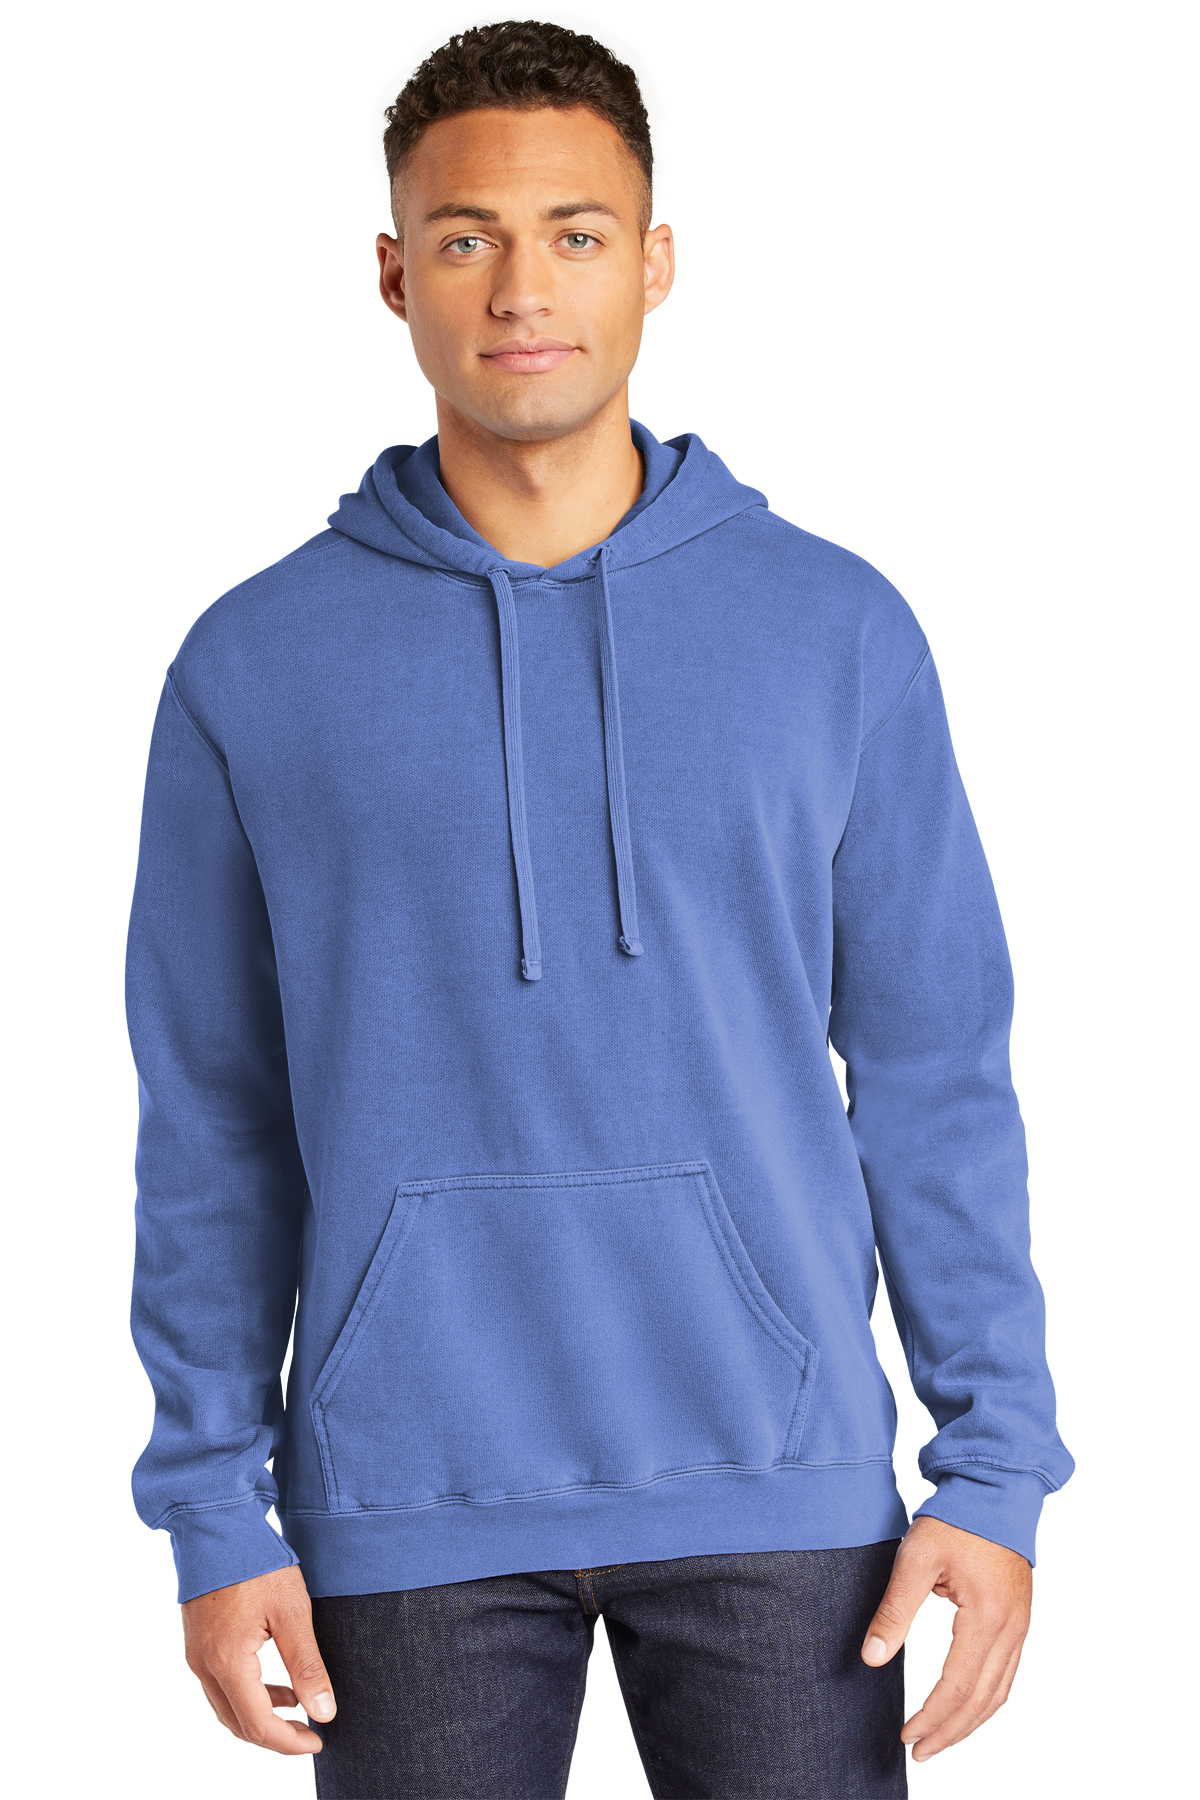 Comfort Colors Ring Spun Hooded Sweatshirt | Product | Company Casuals